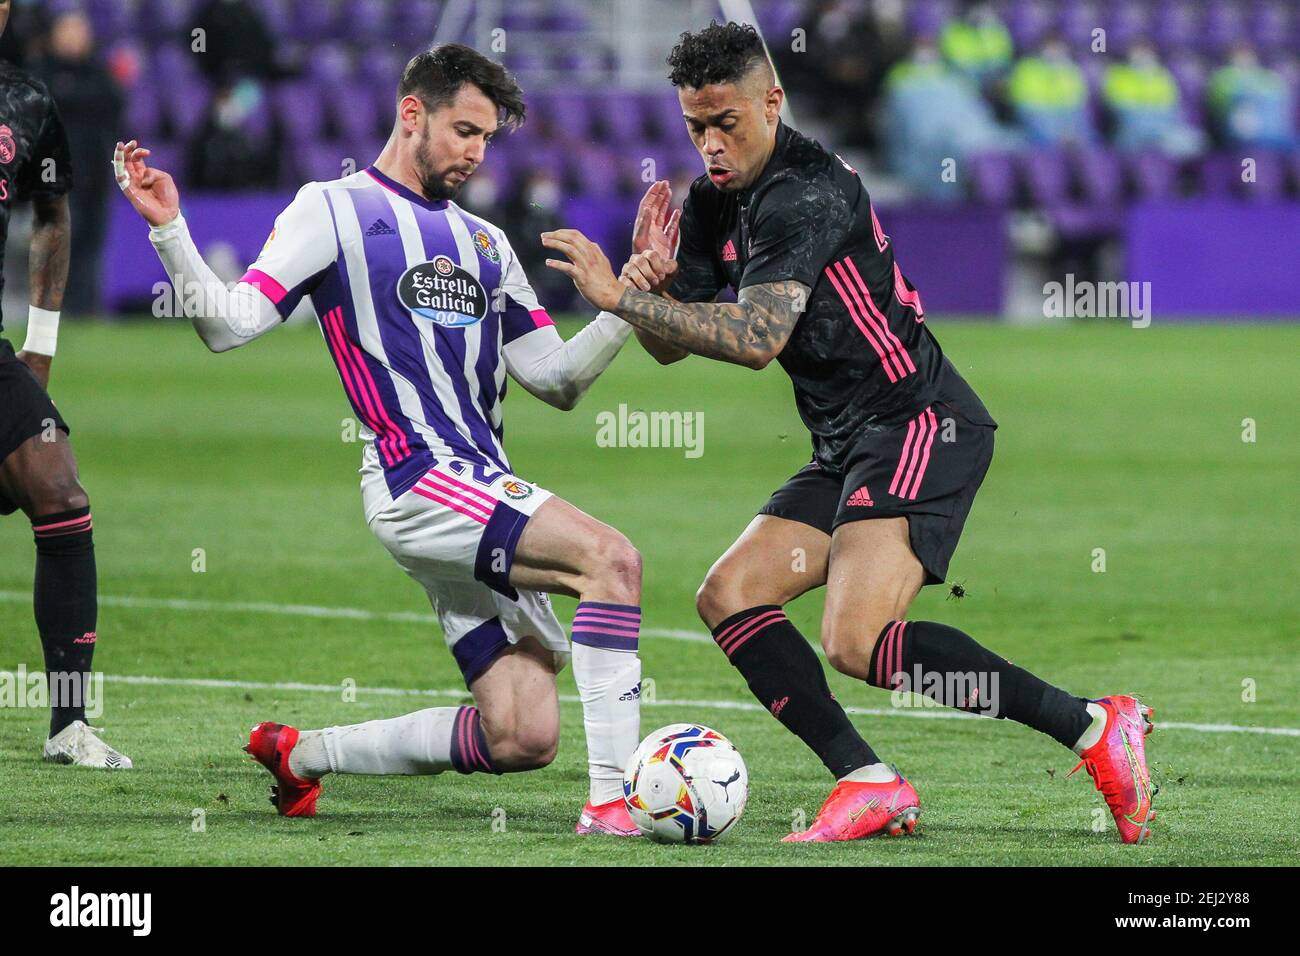 Luis Perez of Real Valladolid and Mariano Diaz of Real Madrid during the Spanish championship La Liga football match between Real Vallad / LM Stock Photo